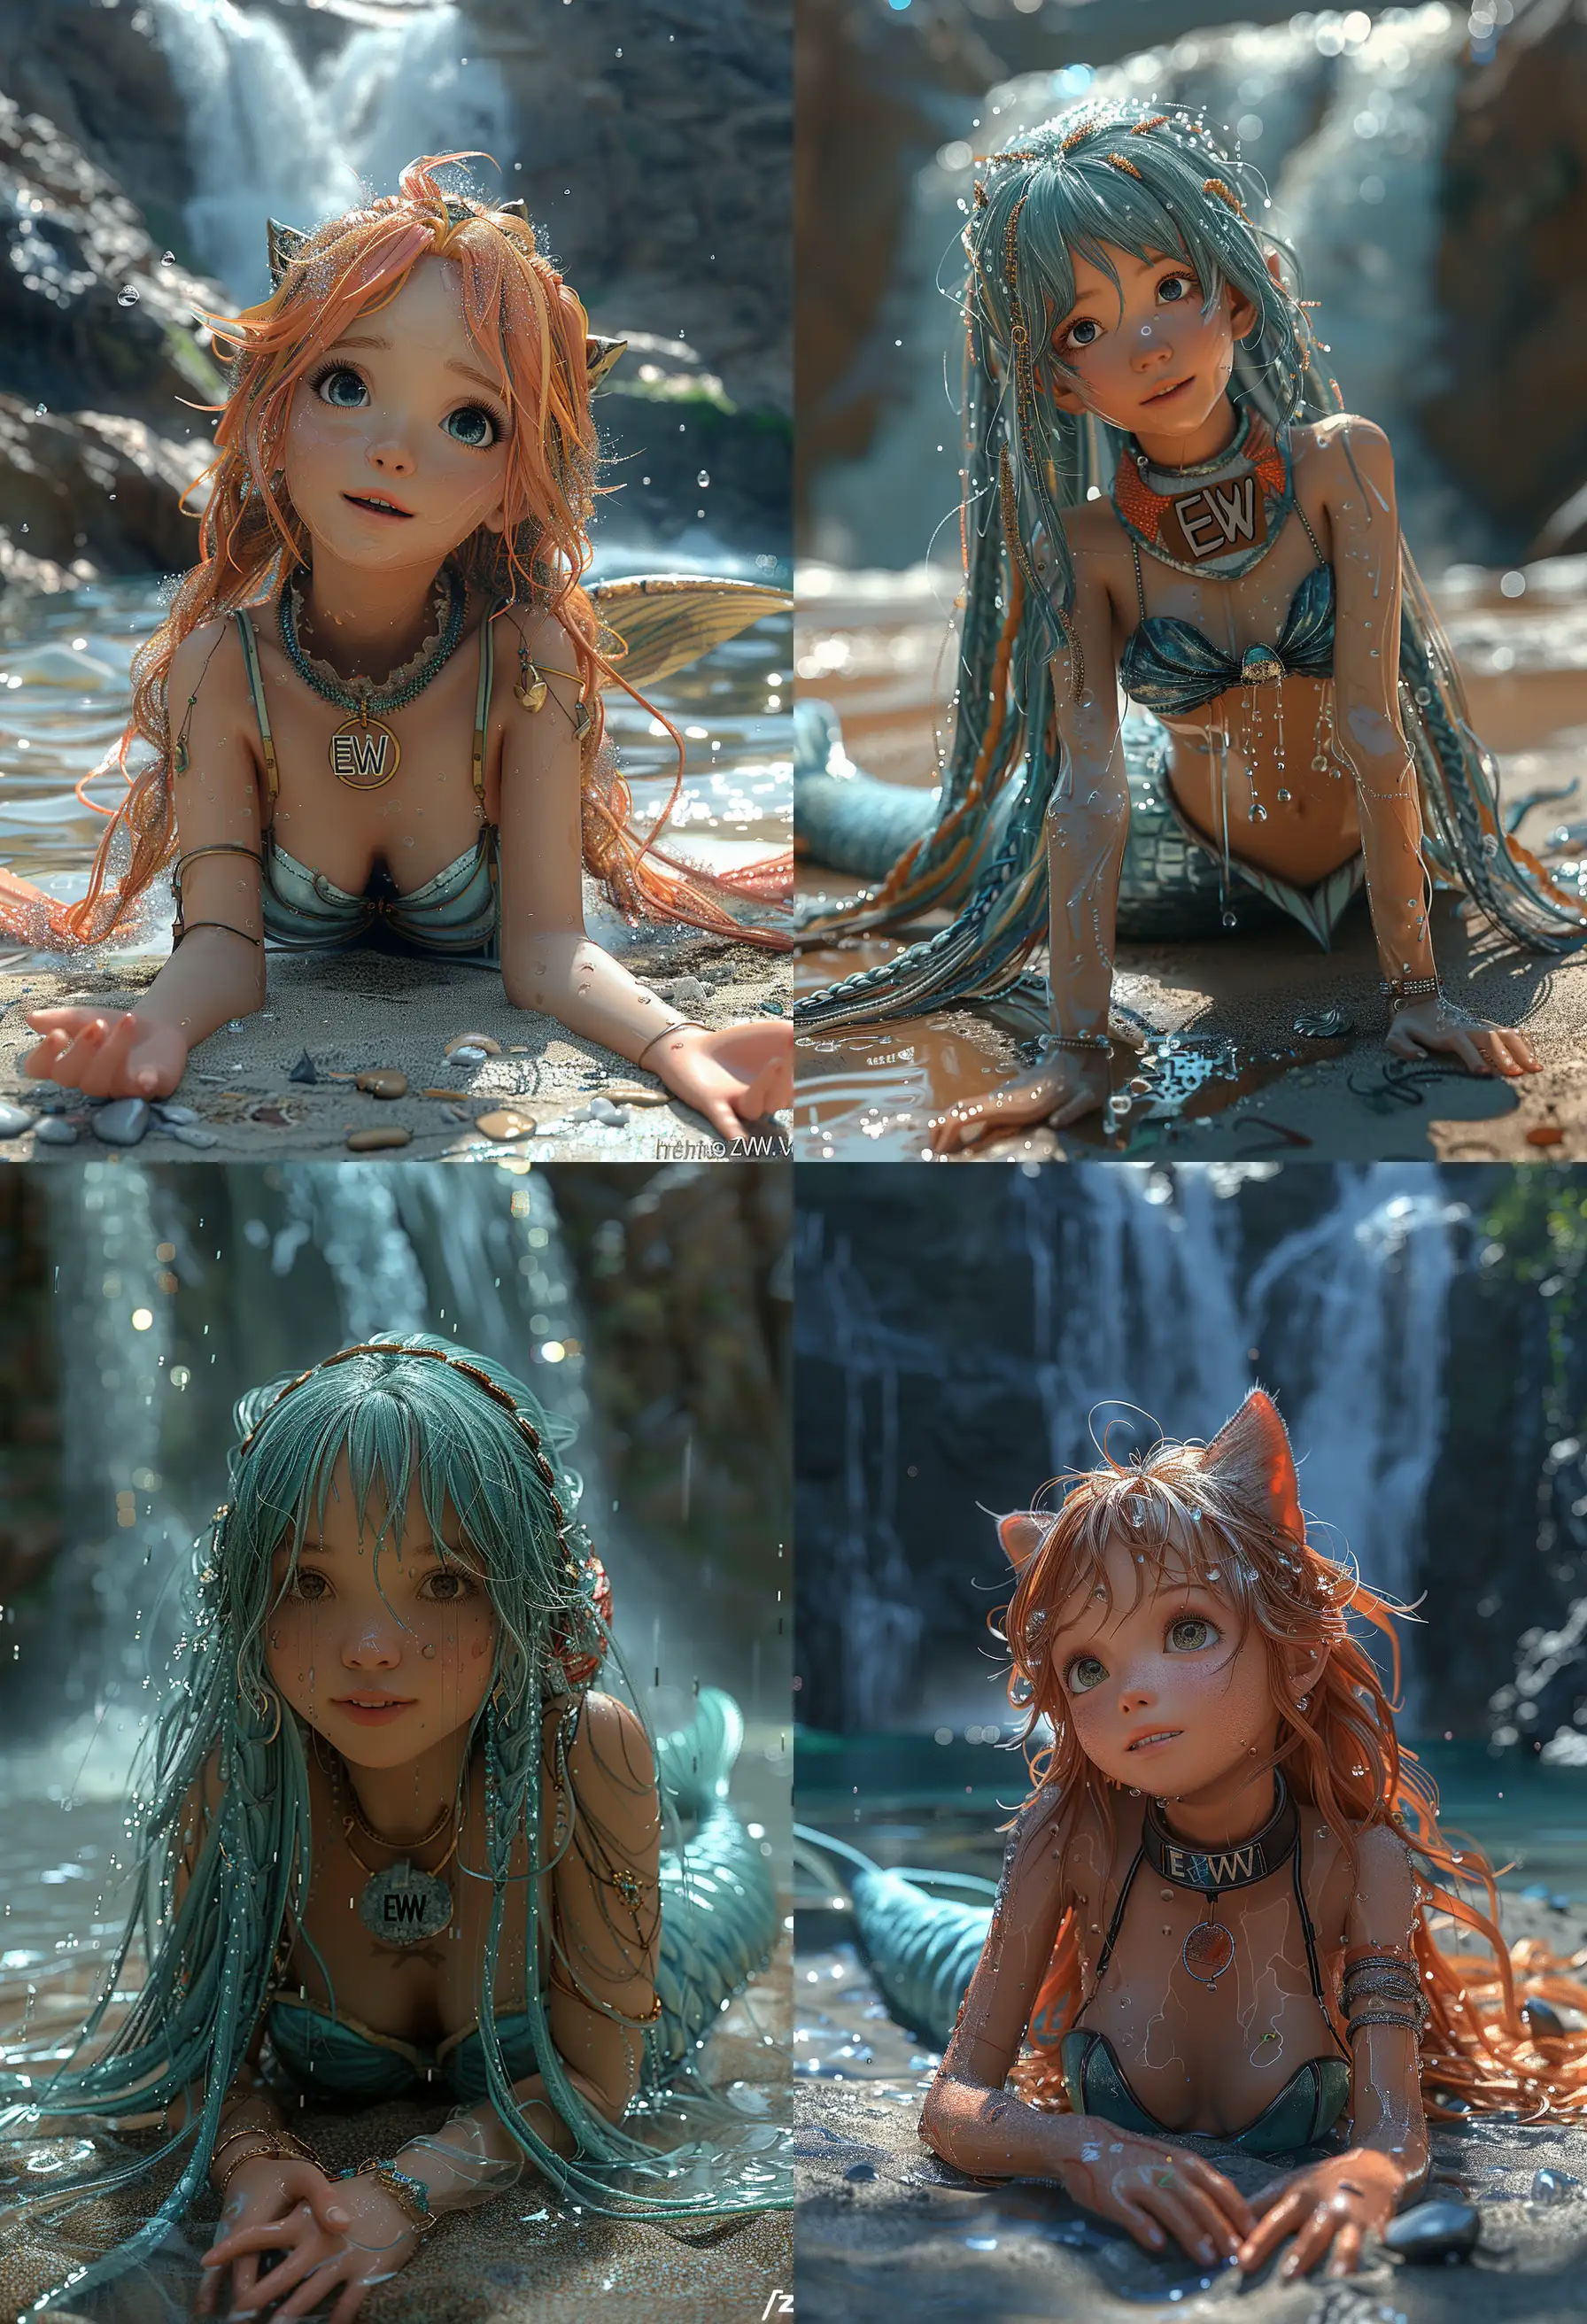 Enchanting-Anime-Mermaid-with-EWW-Collar-by-Ethereal-Waterfall